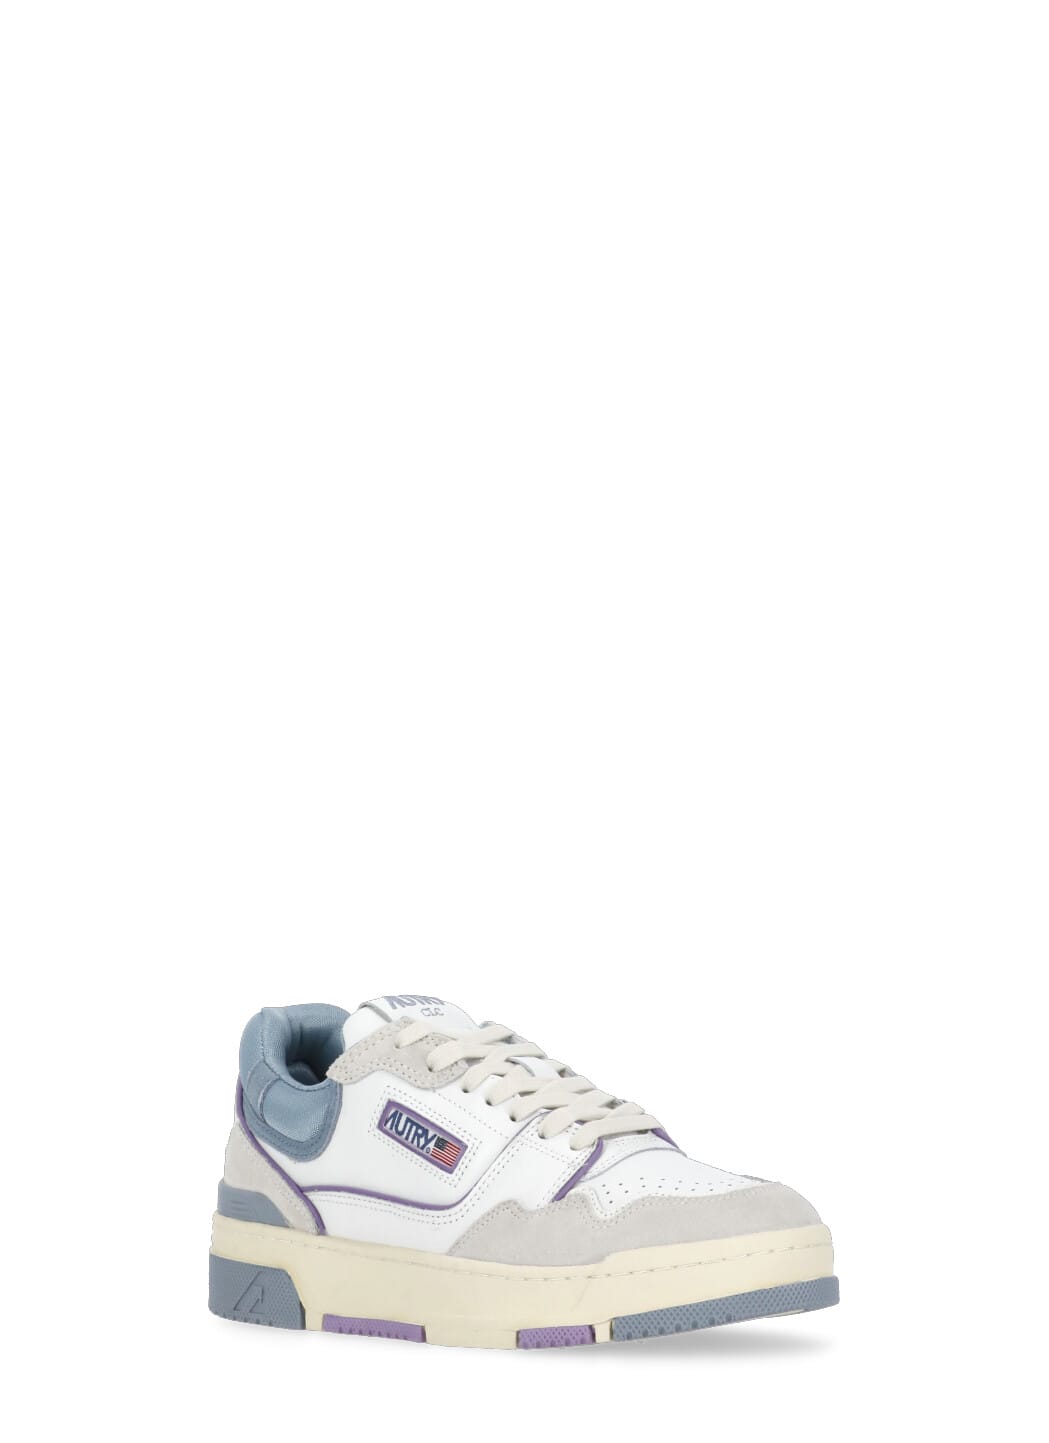 Shop Autry Clc Low Sneakers In Bianco